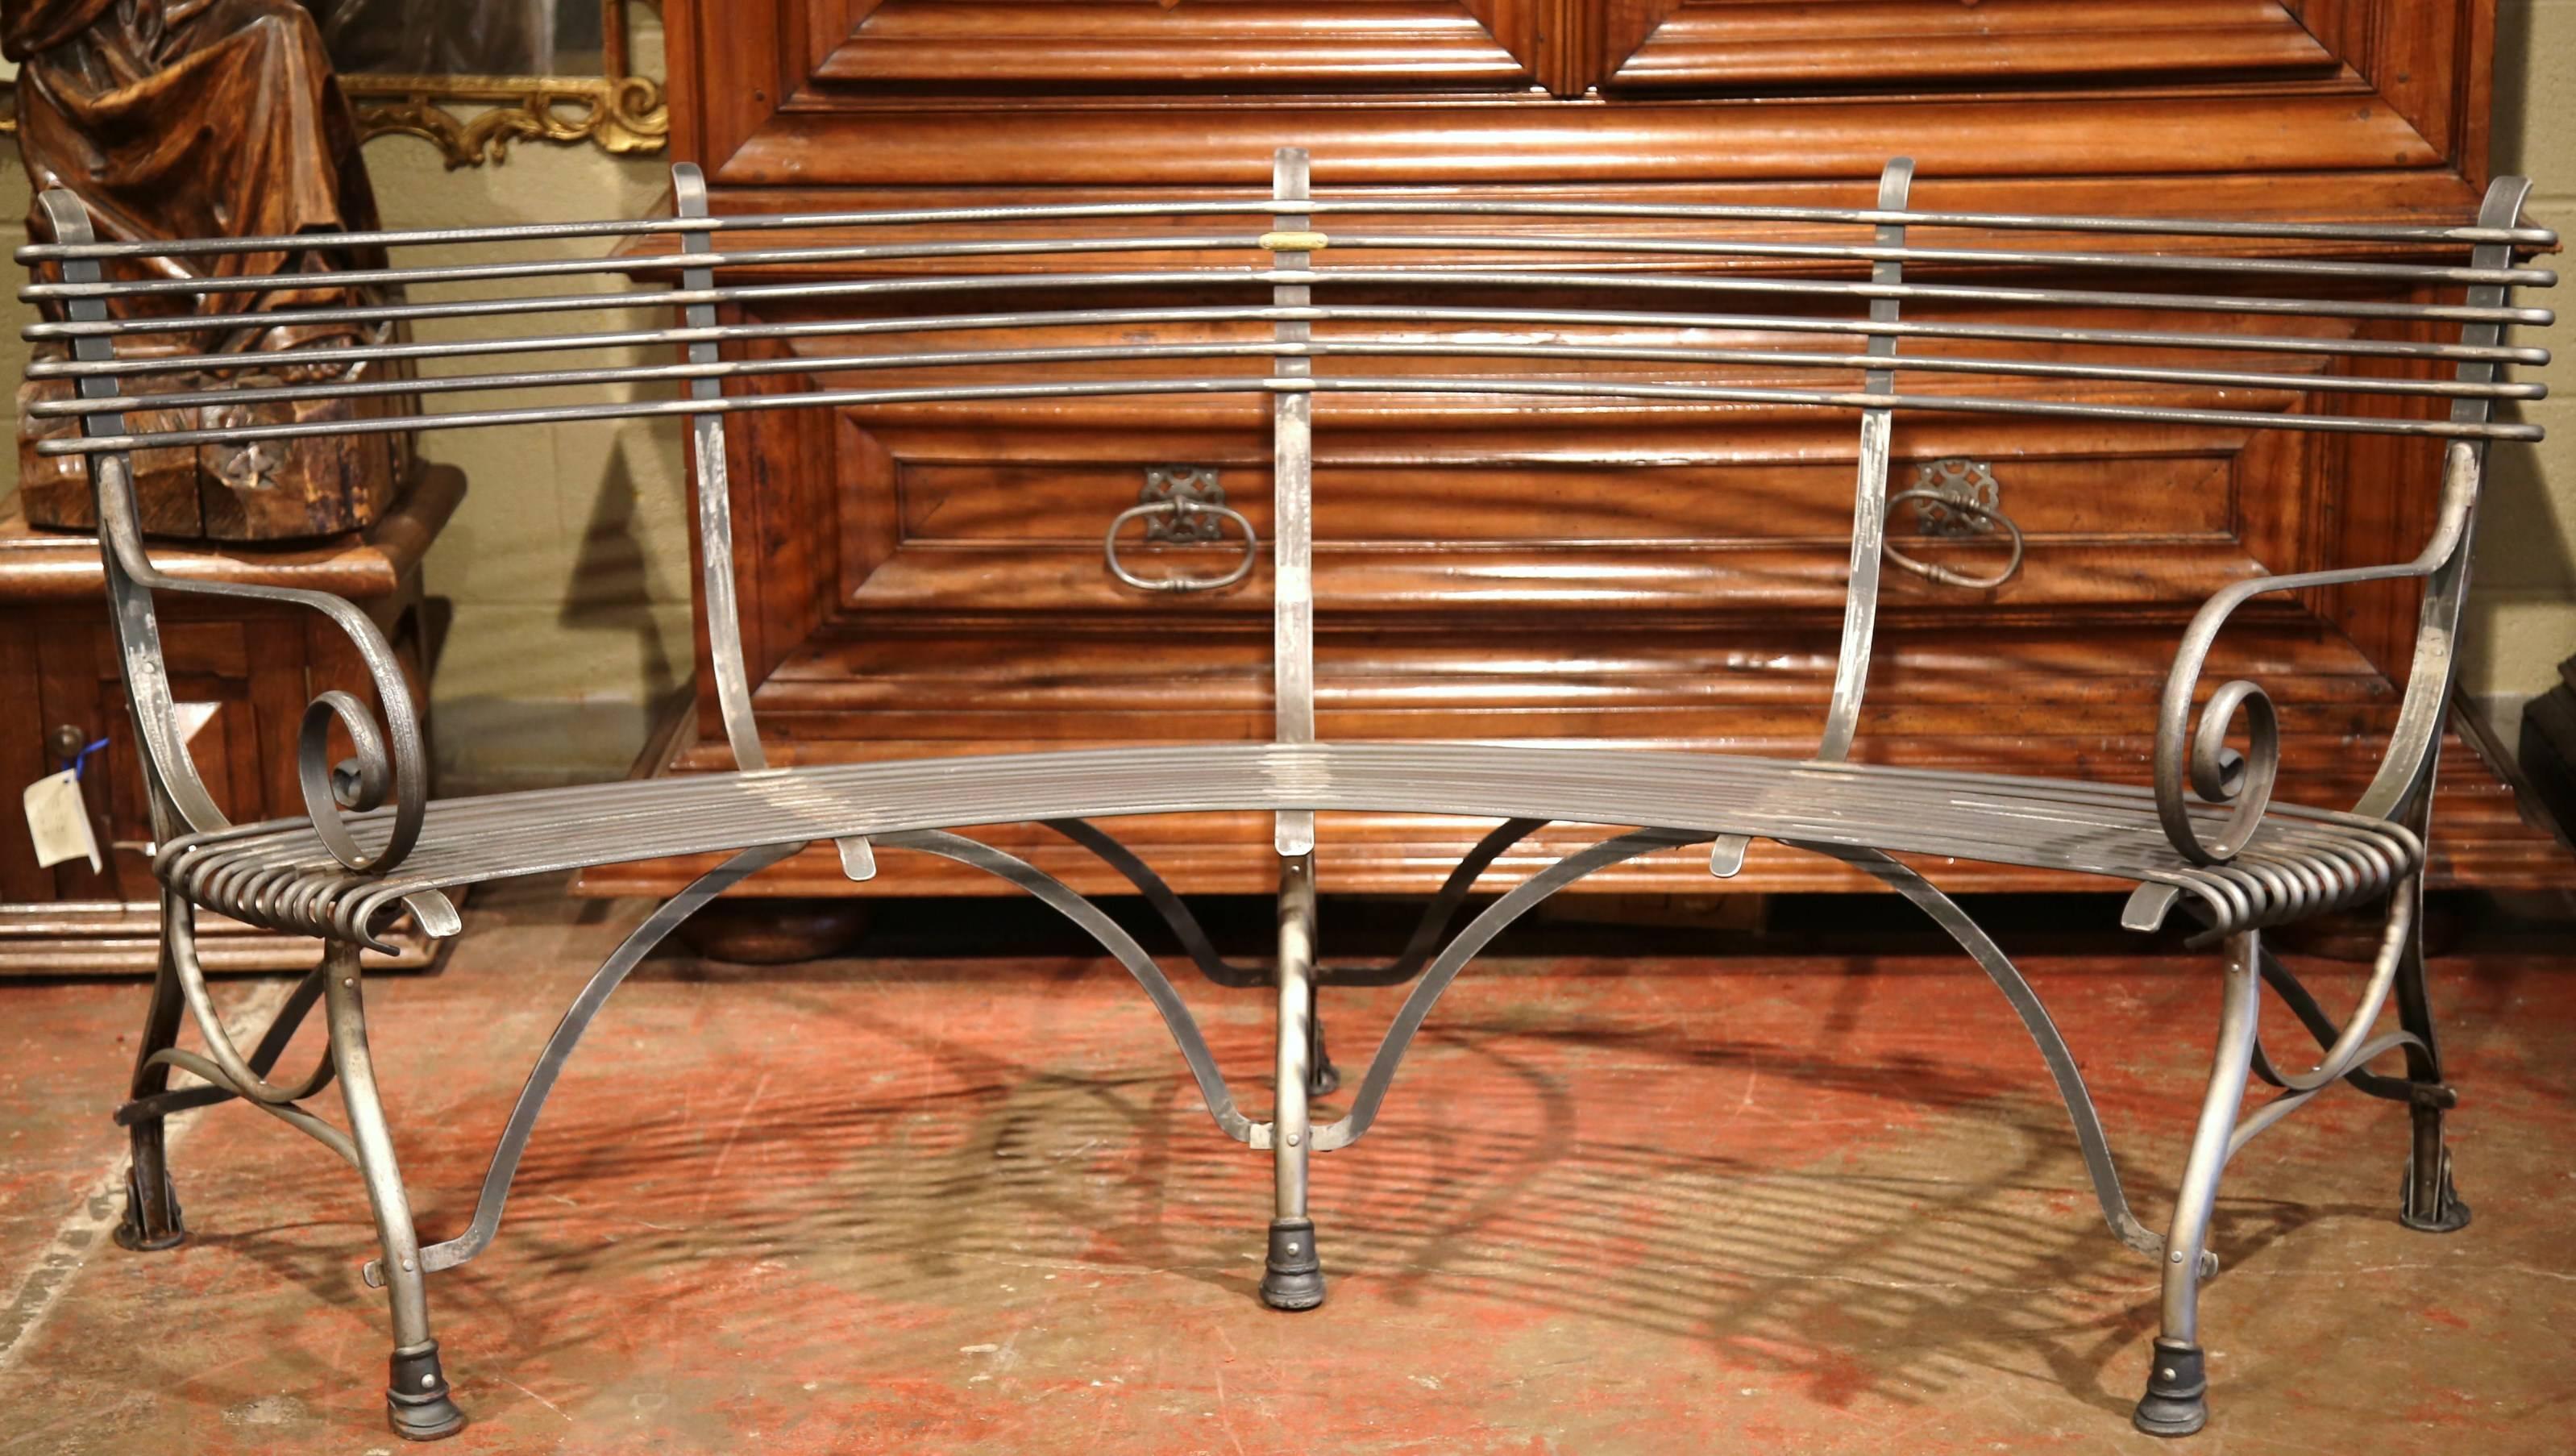 This elegant forged and curved iron bench was crafted in France and has a beautiful polished gun barrel finish. The rounded bench has gracious lines, scrolled armrests, a curved back and six hoof feet with stretchers. The bench is signed Sauveur a